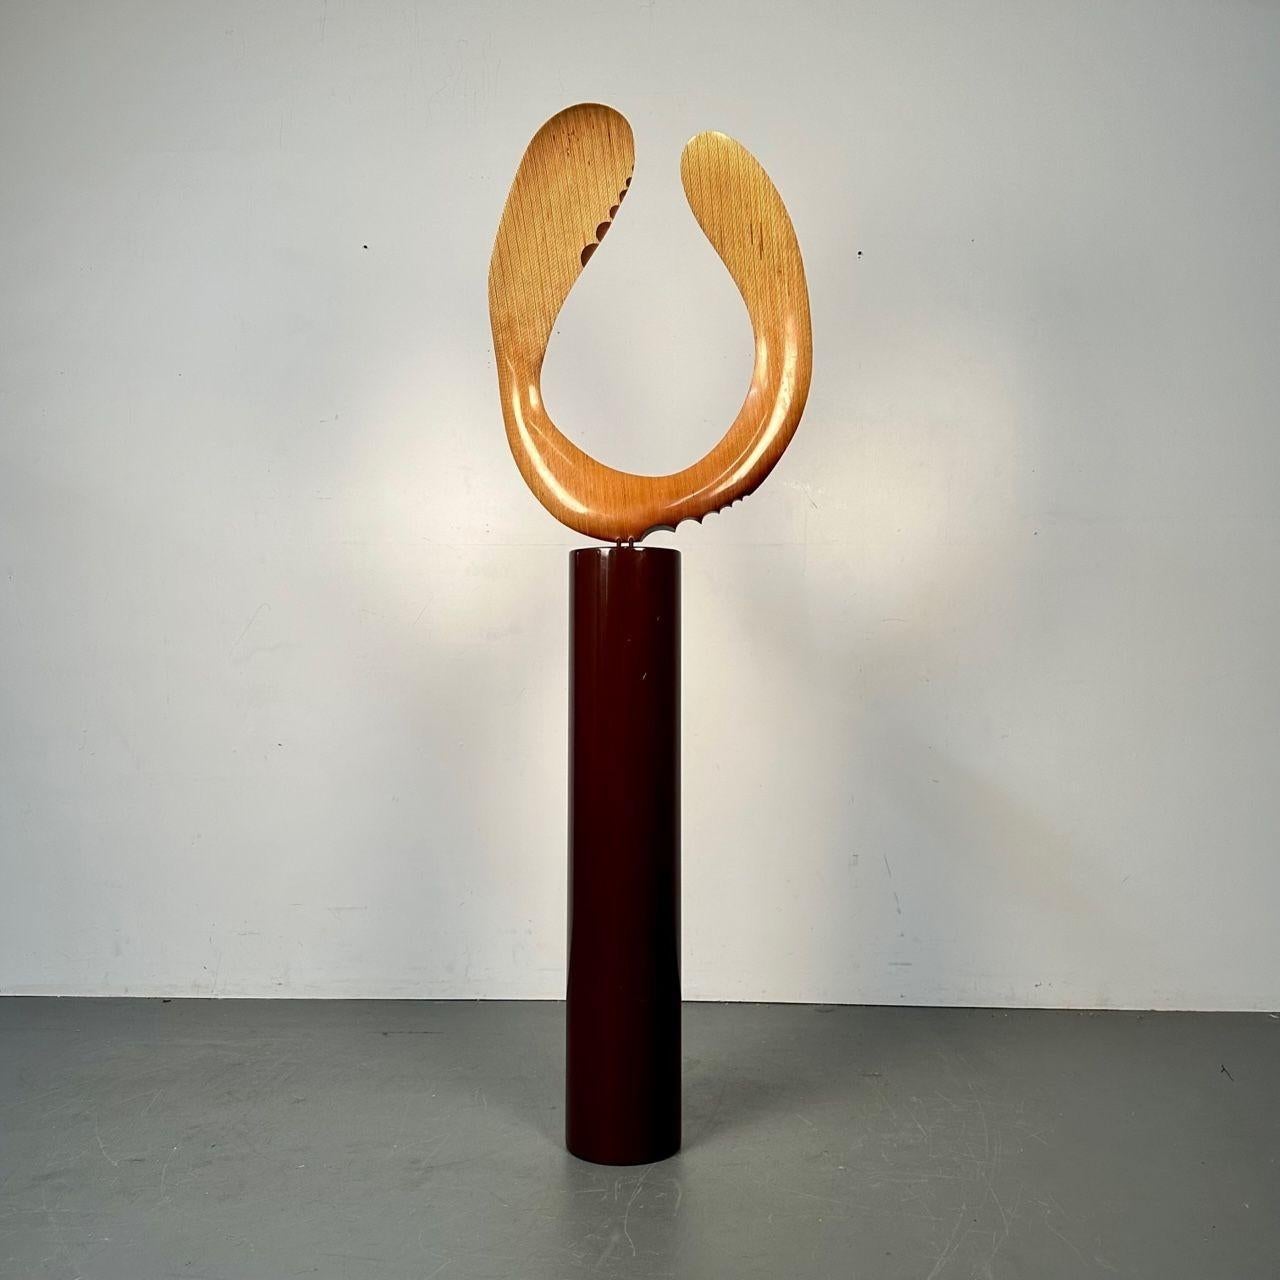  David Hymes, Contemporary, Boomerang Sculpture, Plywood, Steel Pedestal, 2010s In Good Condition For Sale In Stamford, CT